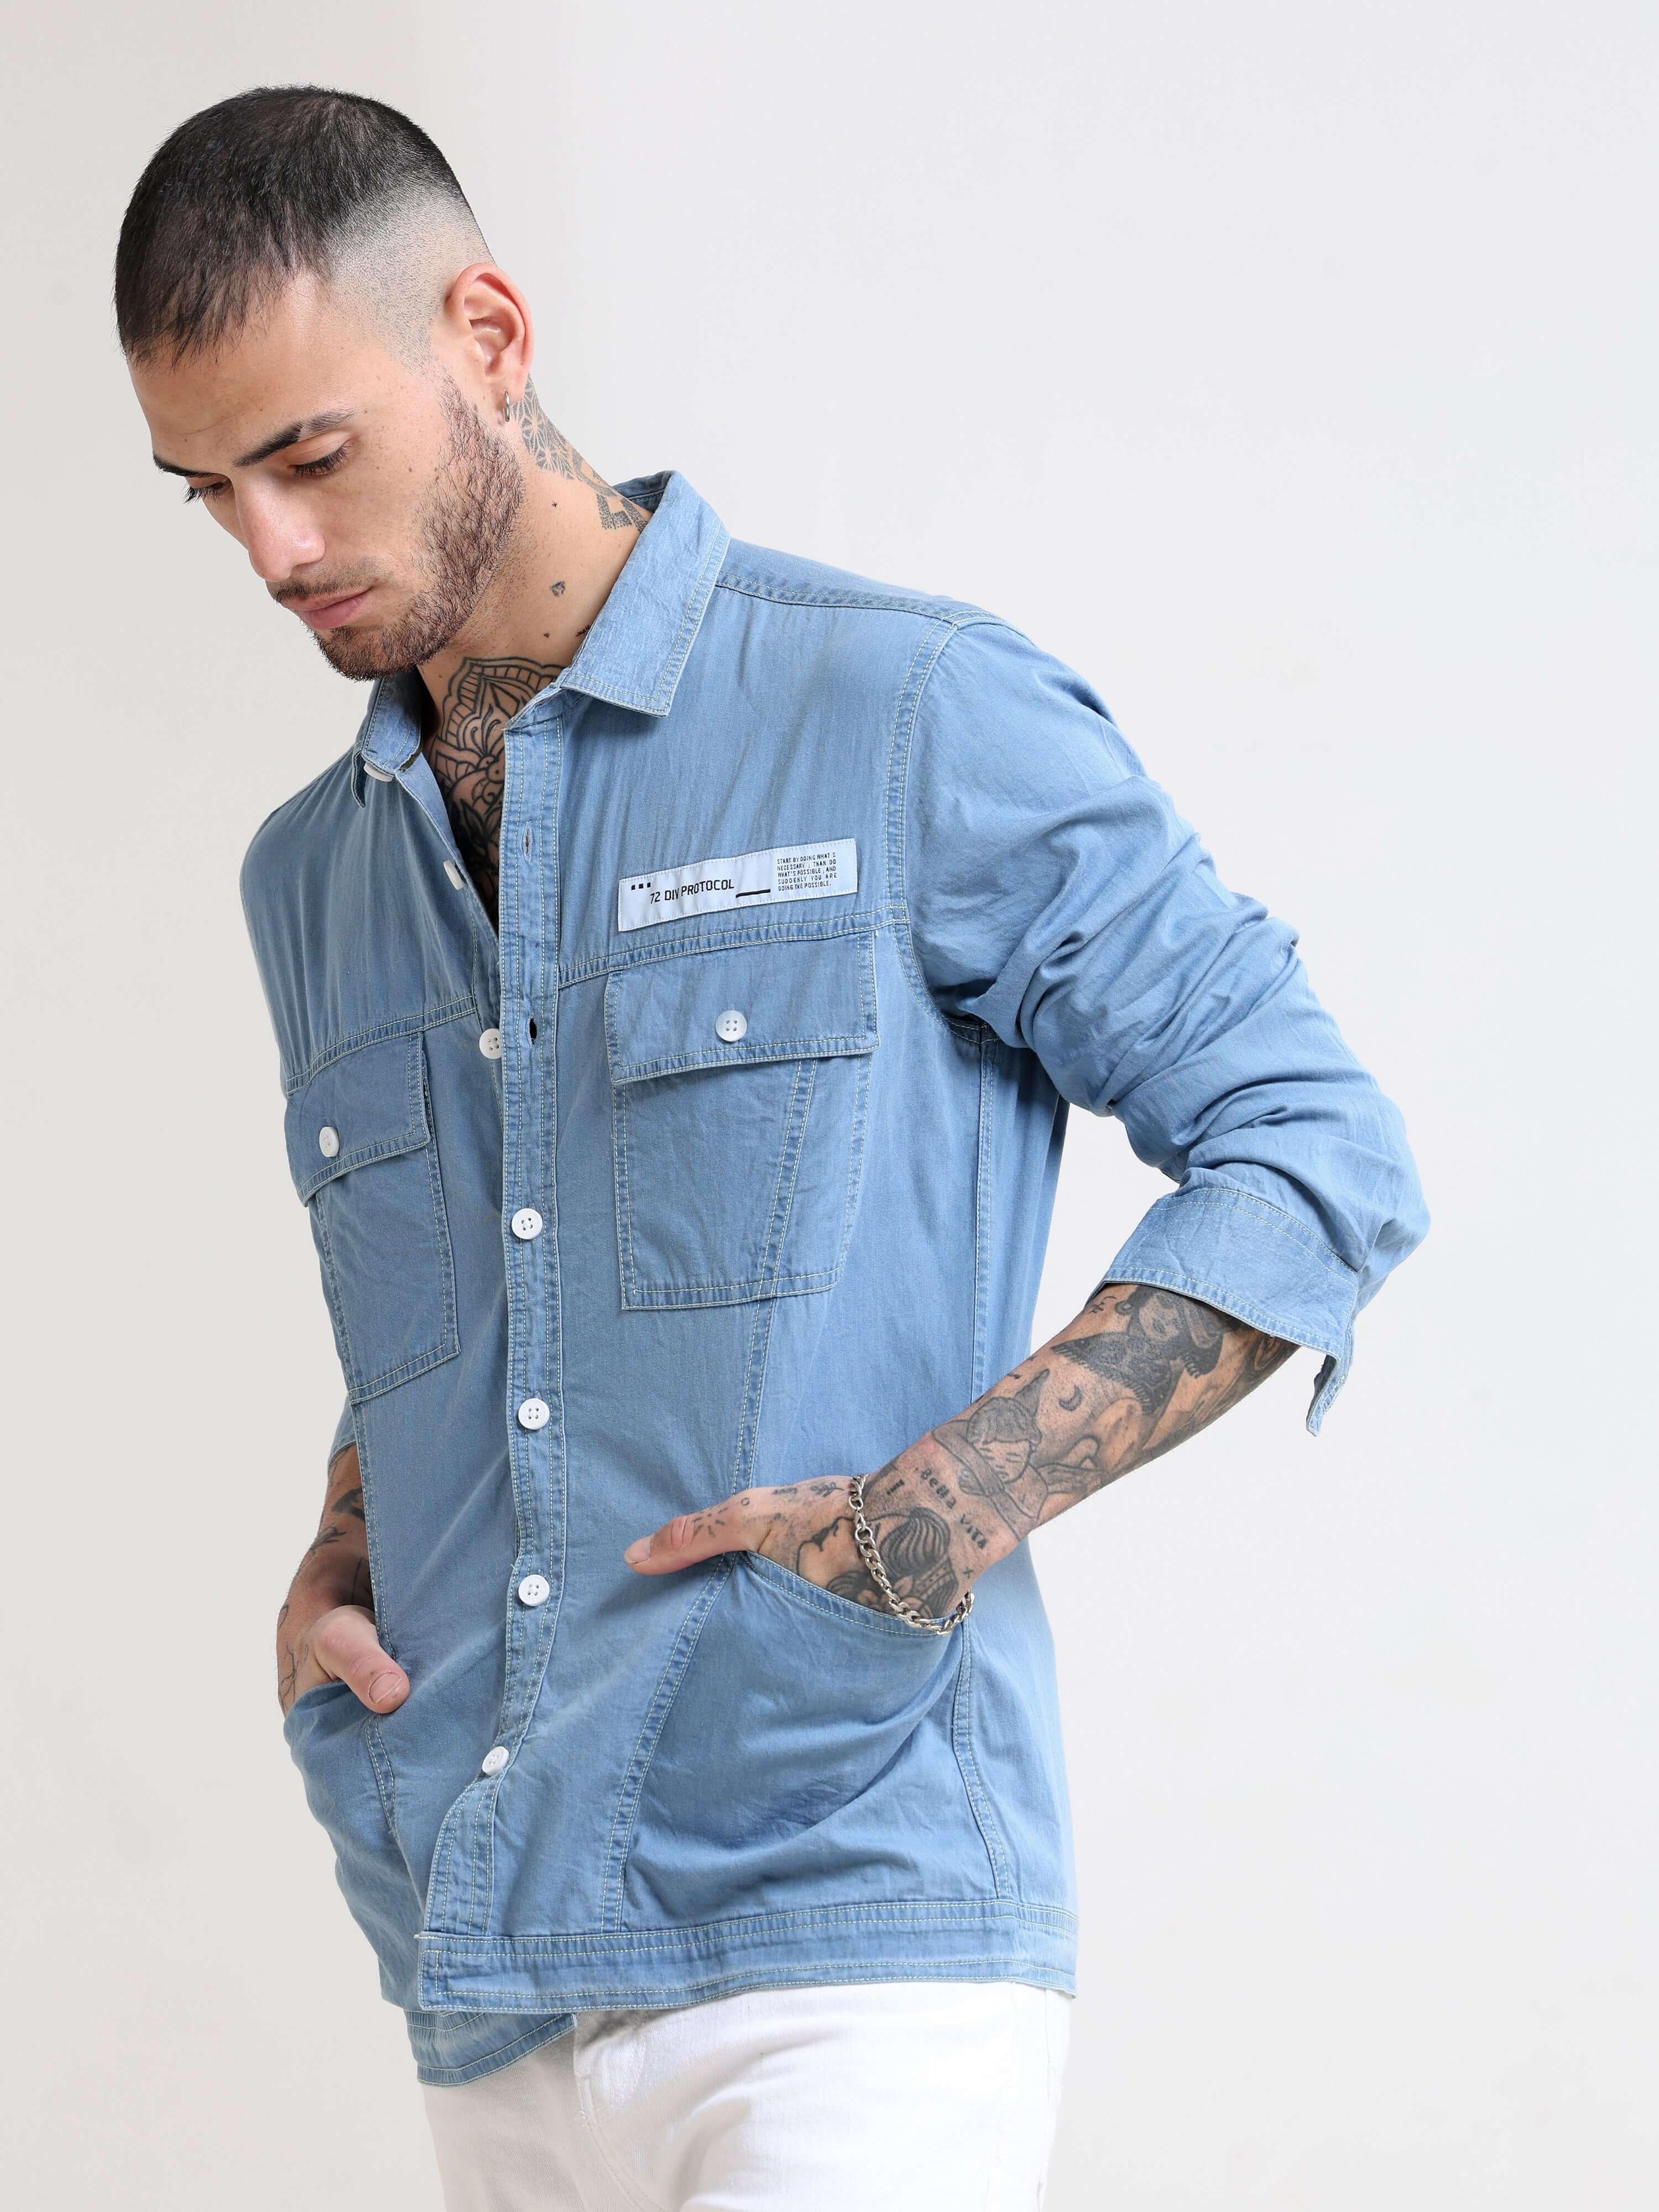 Genie Ice Blue Denim Overshirt shop online at Estilocus. 100% premium Denim Full-sleeve shirt Cut and sew placket. Regular collar Double button edge cuff Double pocket, other end with flap pocket Curved bottom hemline HD elegant print at panal All Double